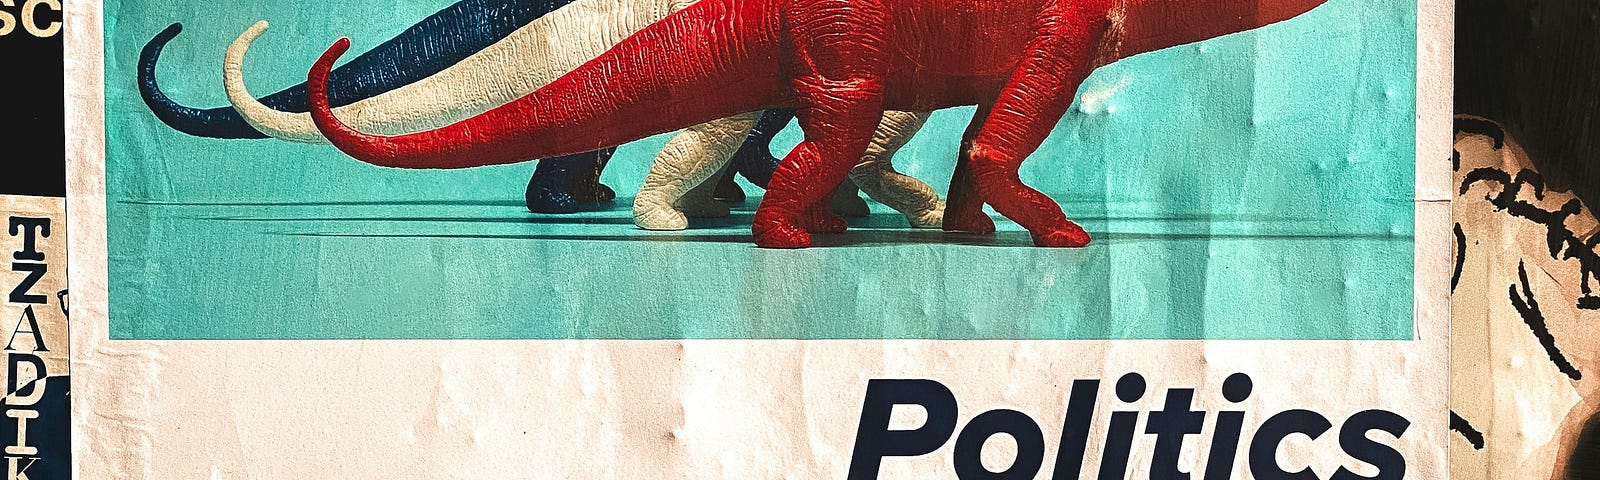 Politics written twice, with 3 dinosaurs in red, white, and blue shown twice with a pharmaceutical reference in the background.